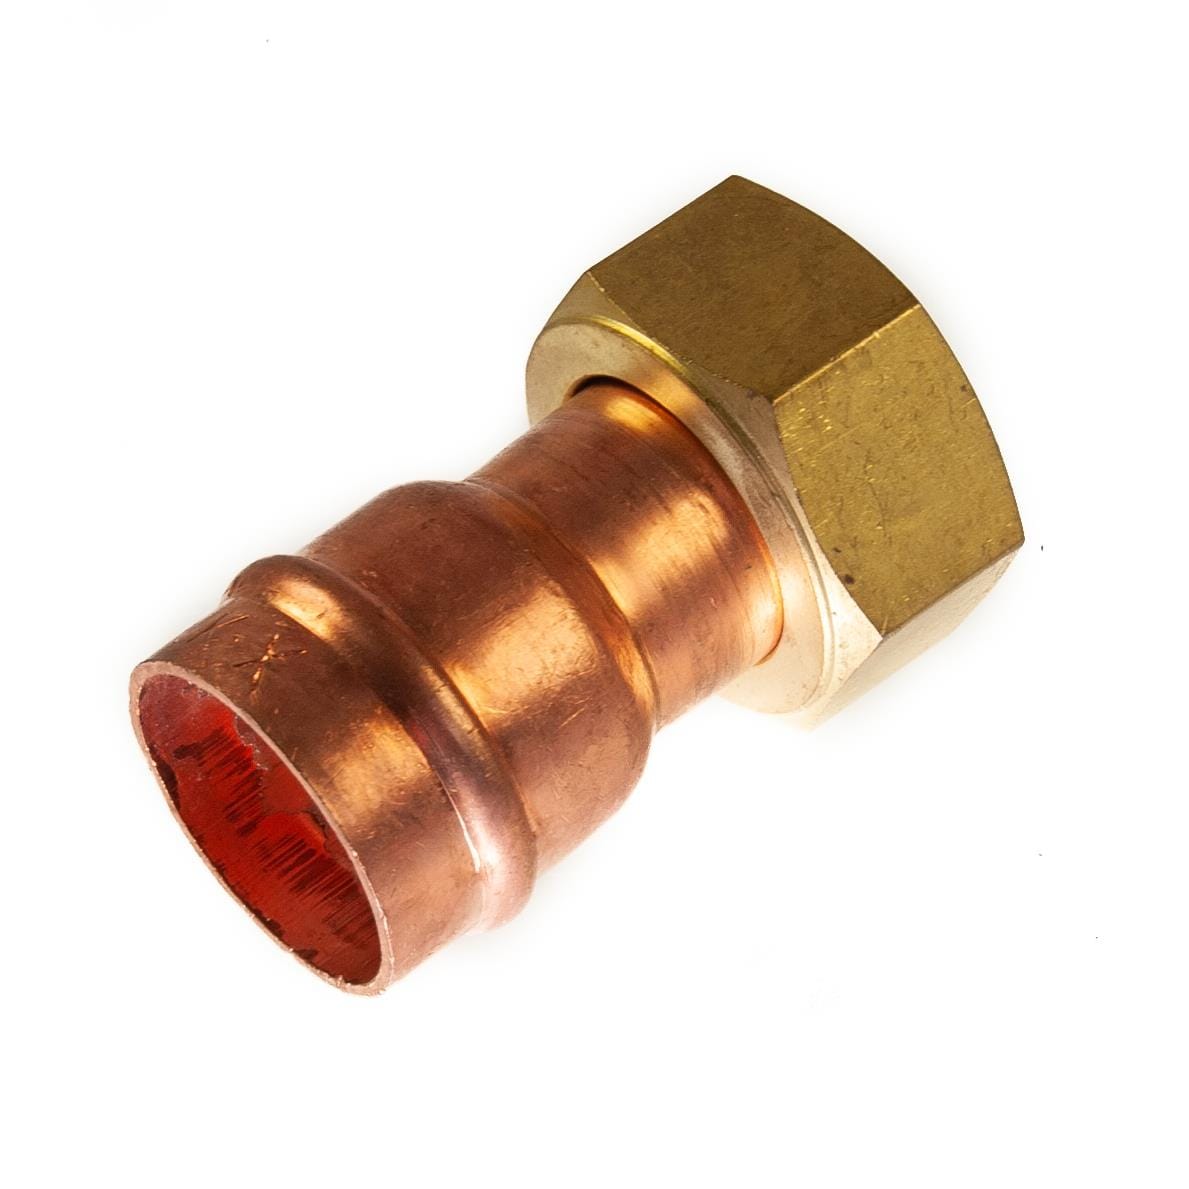 22mm x 3/4" BSP Solder Ring Straight Tap Connector Solder Ring Fittings Thunderfix 901016